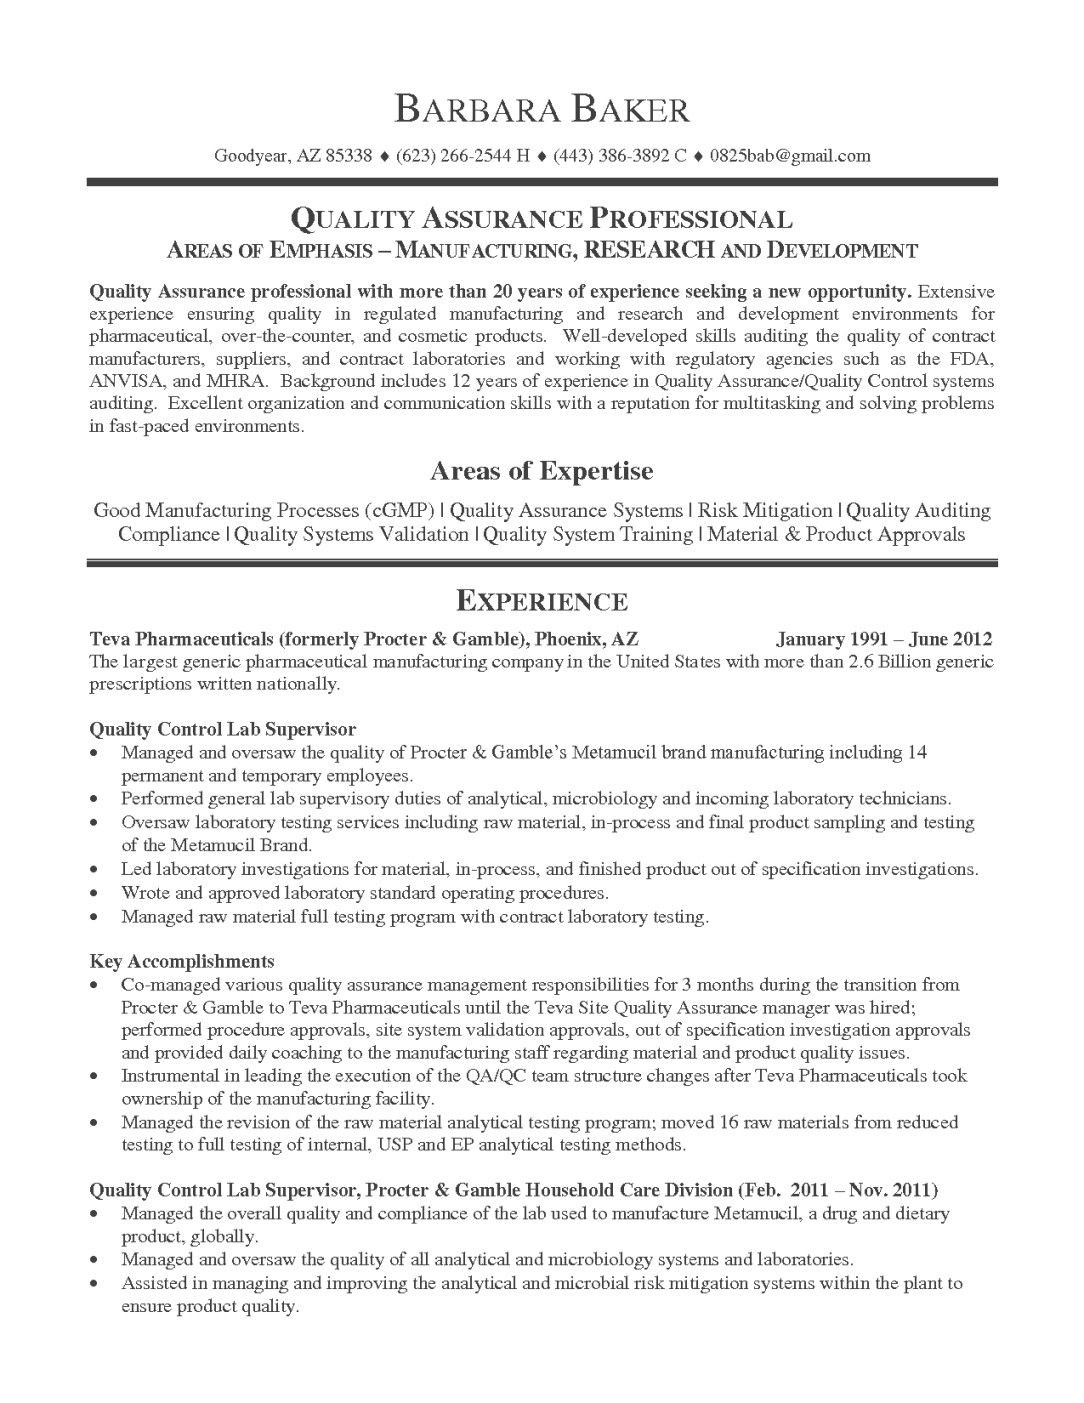 Pharmaceutical Resume Samples for Quality Control Resume format Quality assurance Pharma – Resume format Manager …